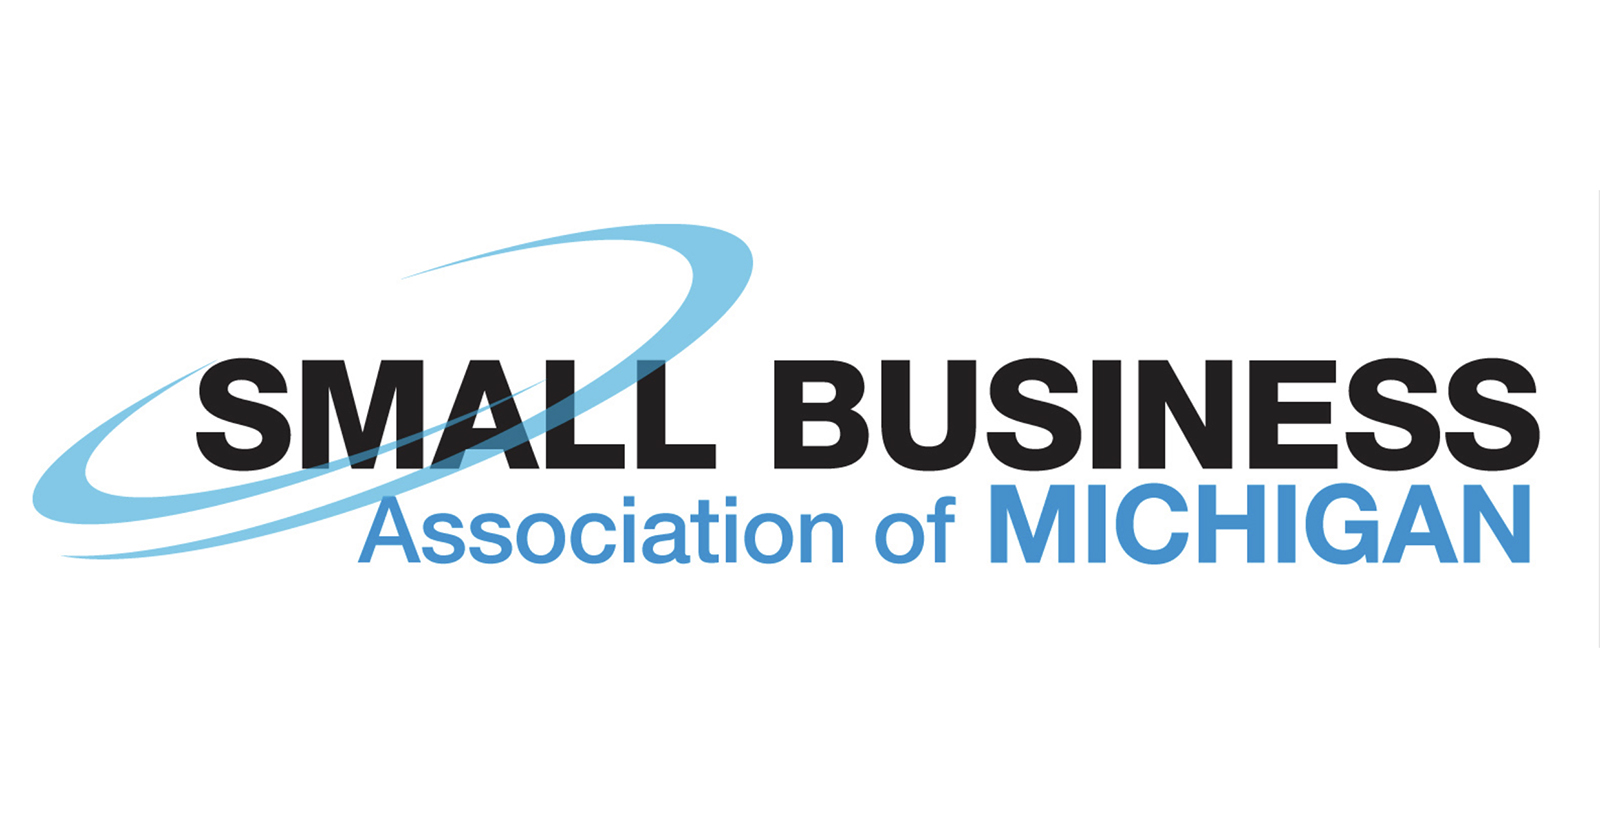 WCC joins Small Business Association of Michigan to strengthen workforce development throughout state